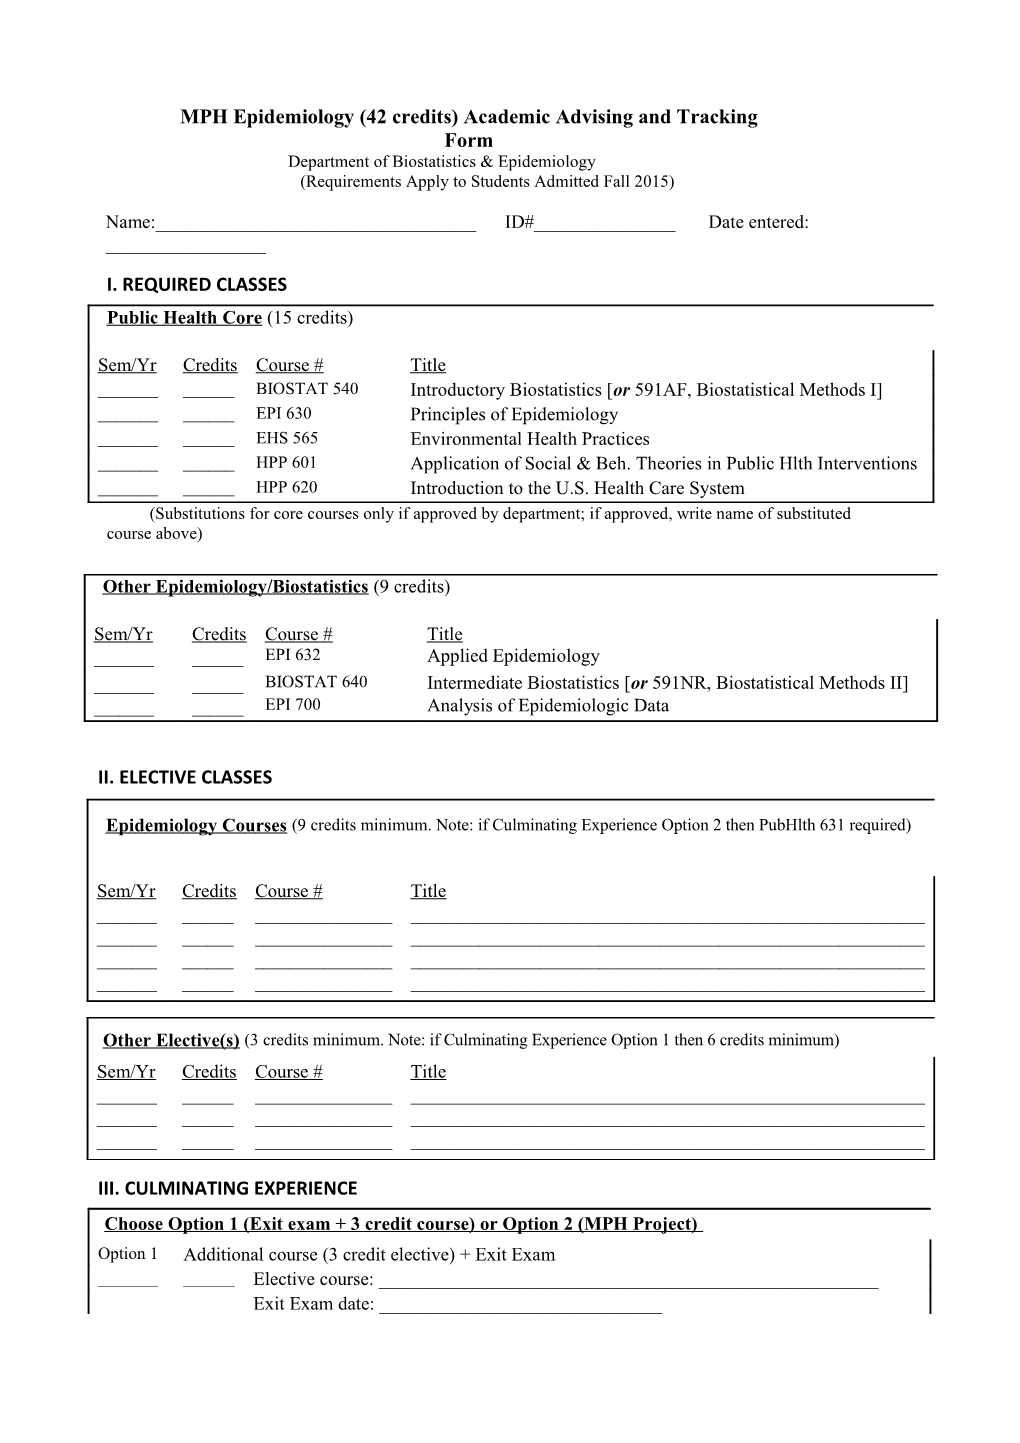 MPH Epidemiology Major (42 Credits) Academic Advising and Tracking Form